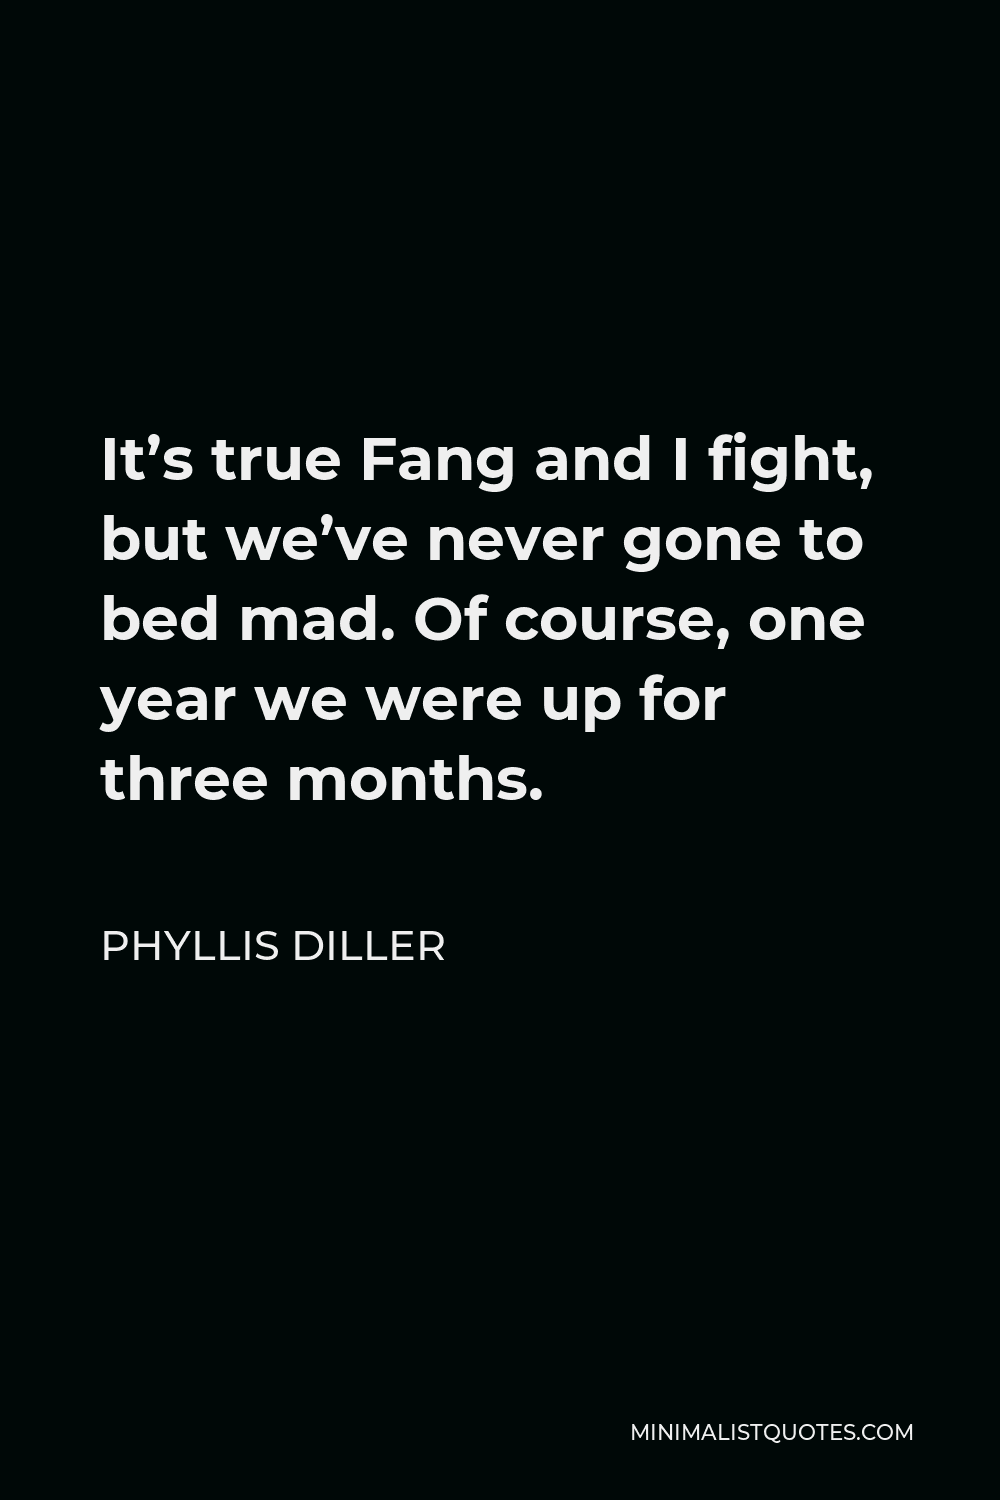 Phyllis Diller Quote - It’s true Fang and I fight, but we’ve never gone to bed mad. Of course, one year we were up for three months.